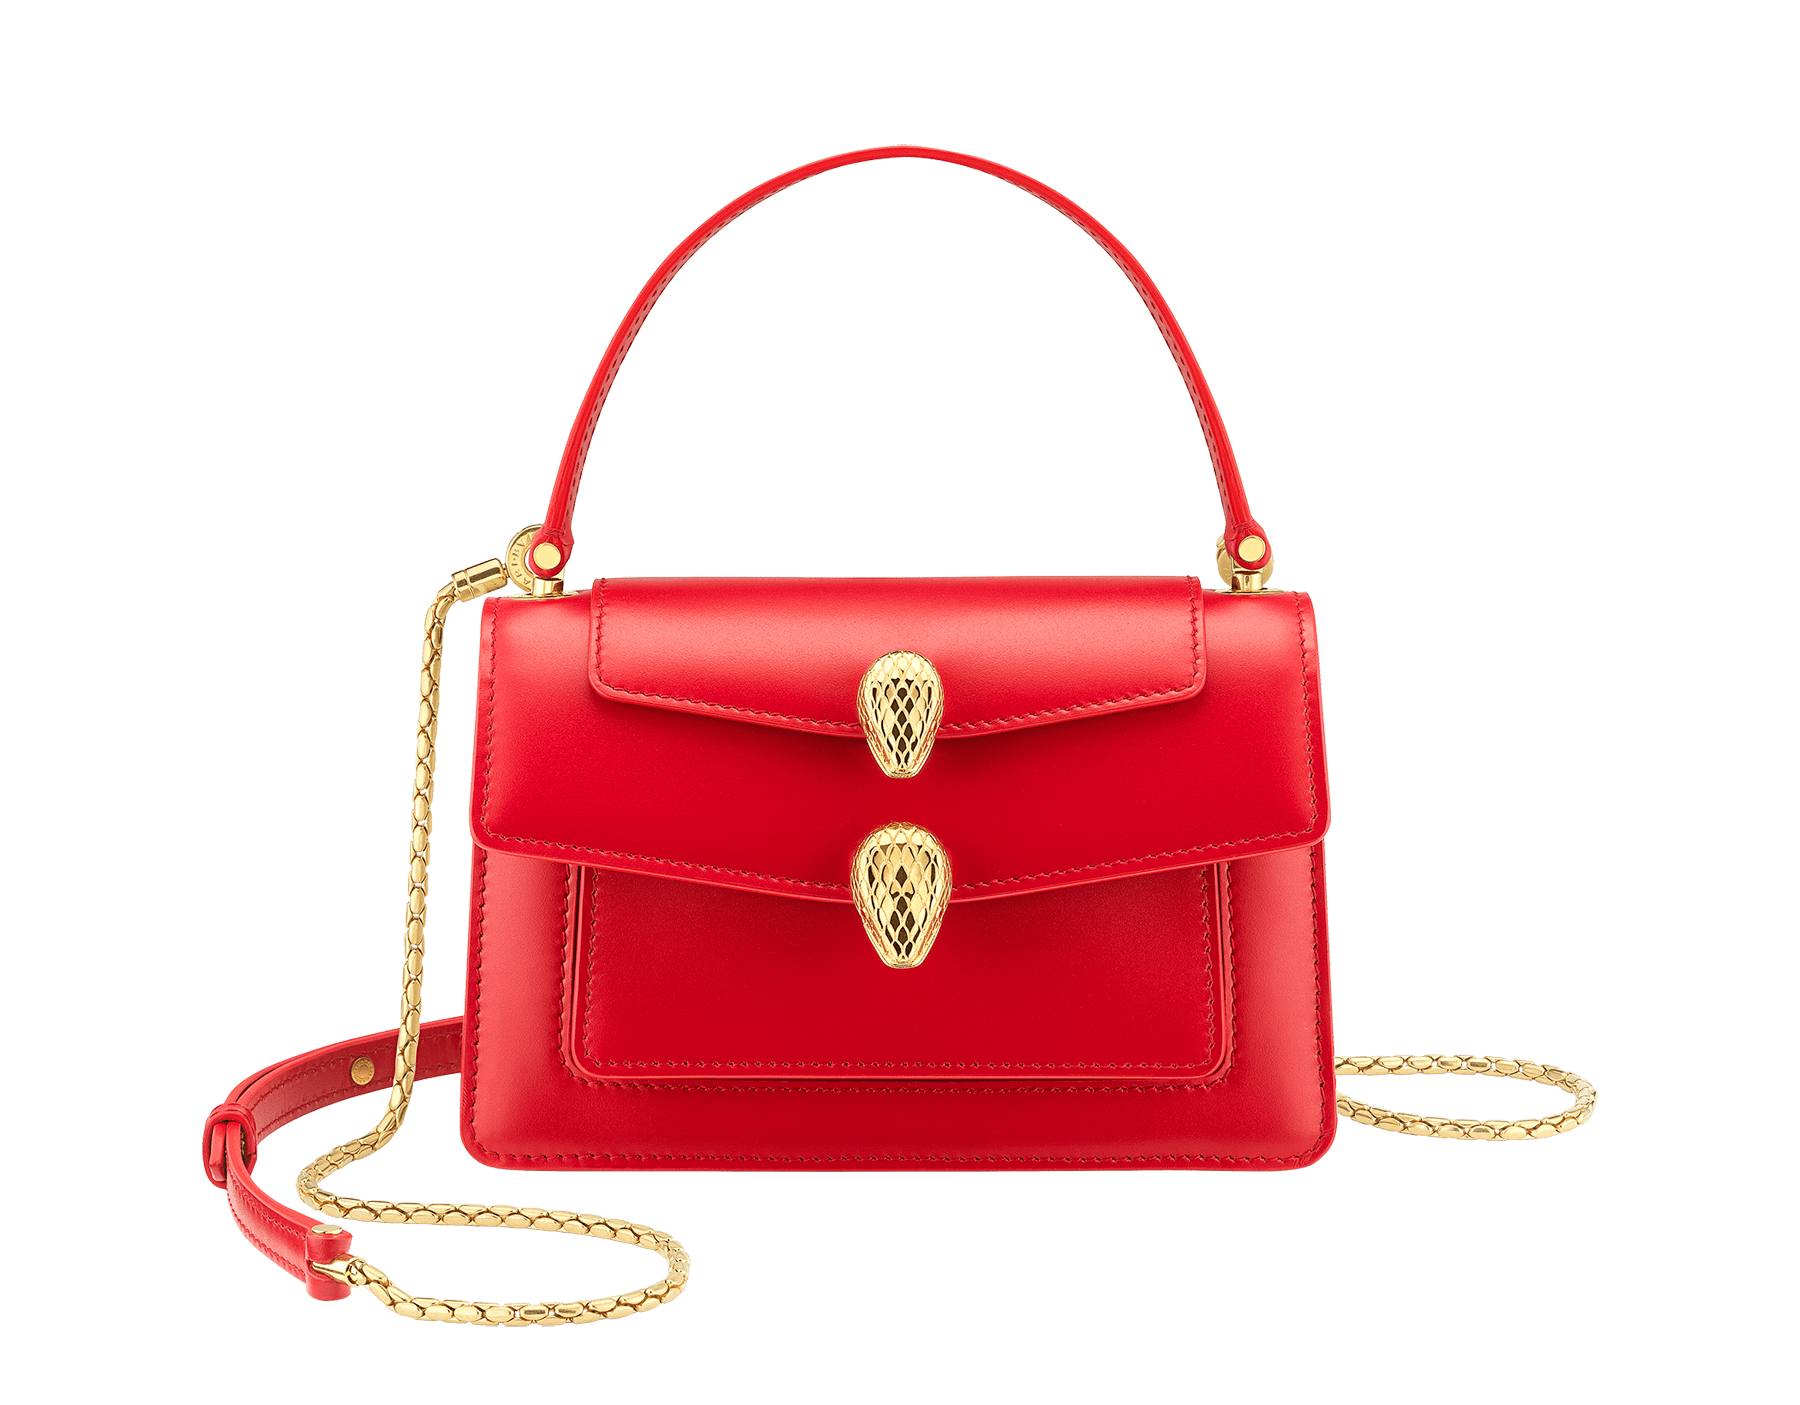 Alexander Wang x Bvlgari belt bag in smooth black calf leather. New double Serpenti head closure in antique gold plated brass with tempting red enamel eyes. Limited edition. SFW-001-1029S image 1